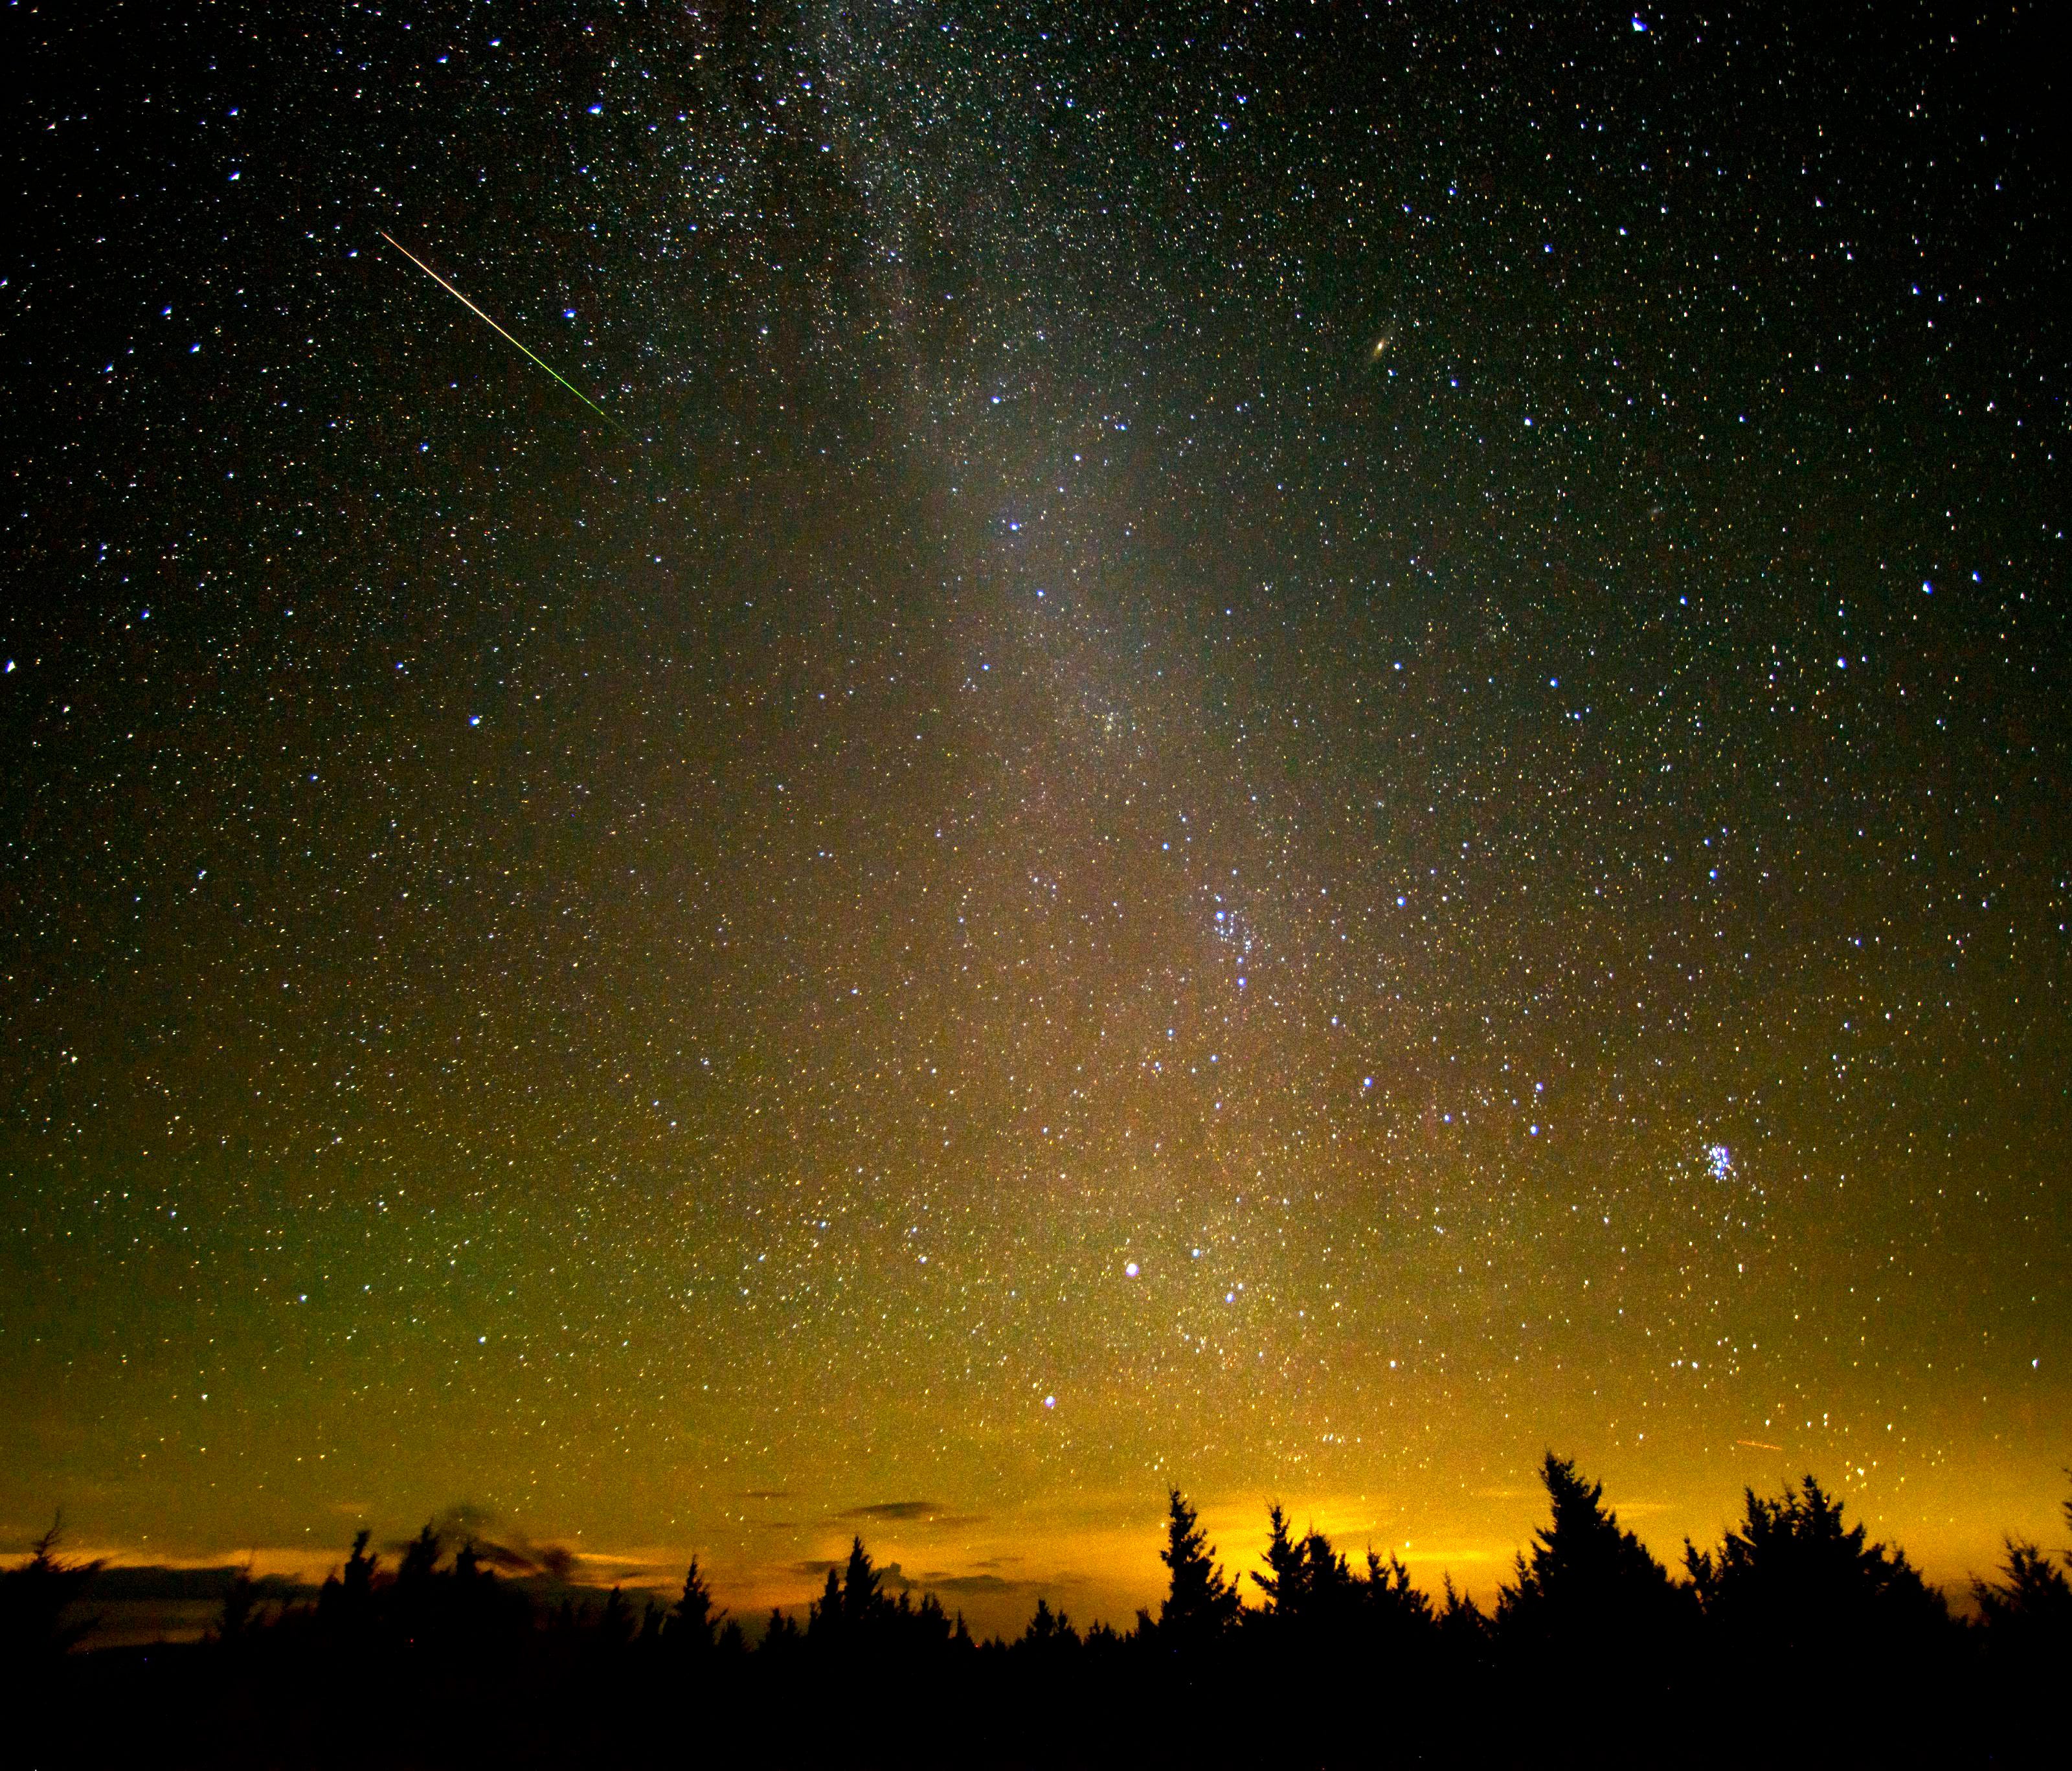 In this 30 second exposure a meteor streaks across the sky during the annual Perseid meteor shower, in Spruce Knob, West Virginia.